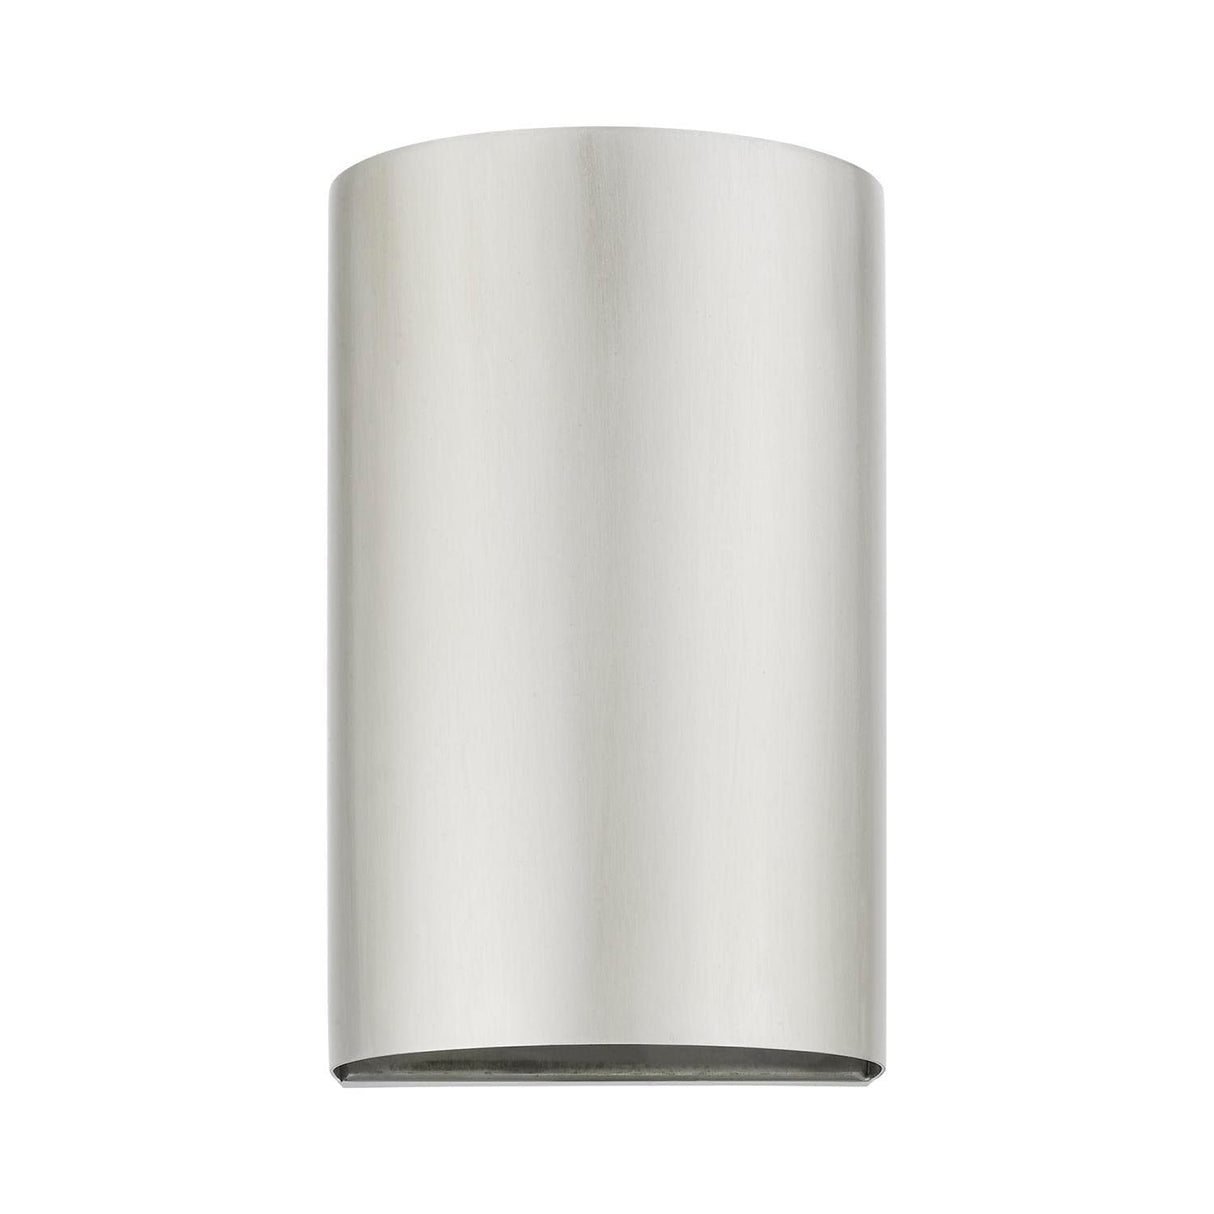 Livex Lighting 22061-91 Bond - 1 Light Small Outdoor ADA Wall Sconce in Urban Style-7 Inches Tall and 4.25 Inches Wide, Finish Color: Brushed Nickel